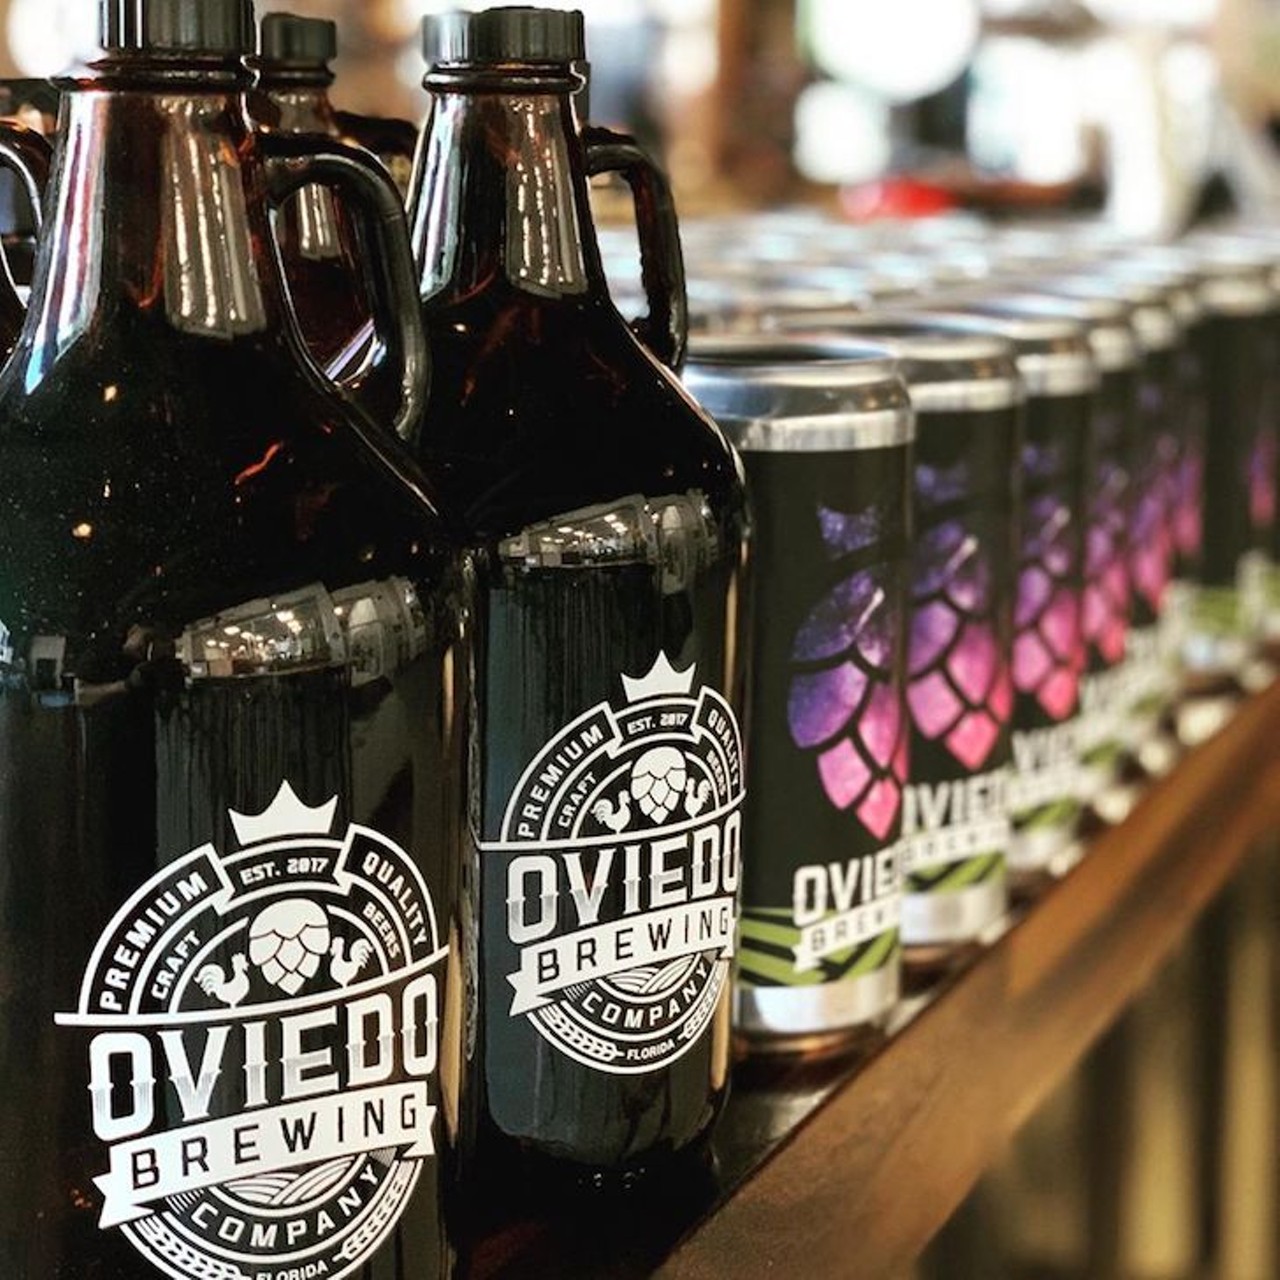 Oviedo Brewing Co. 
Order cans or crowlers by phone (407-542-8248) and get curbside pickup of some of Florida's best small-batch brewery beer.
Photo via Oviedo Brewing Co./Facebook